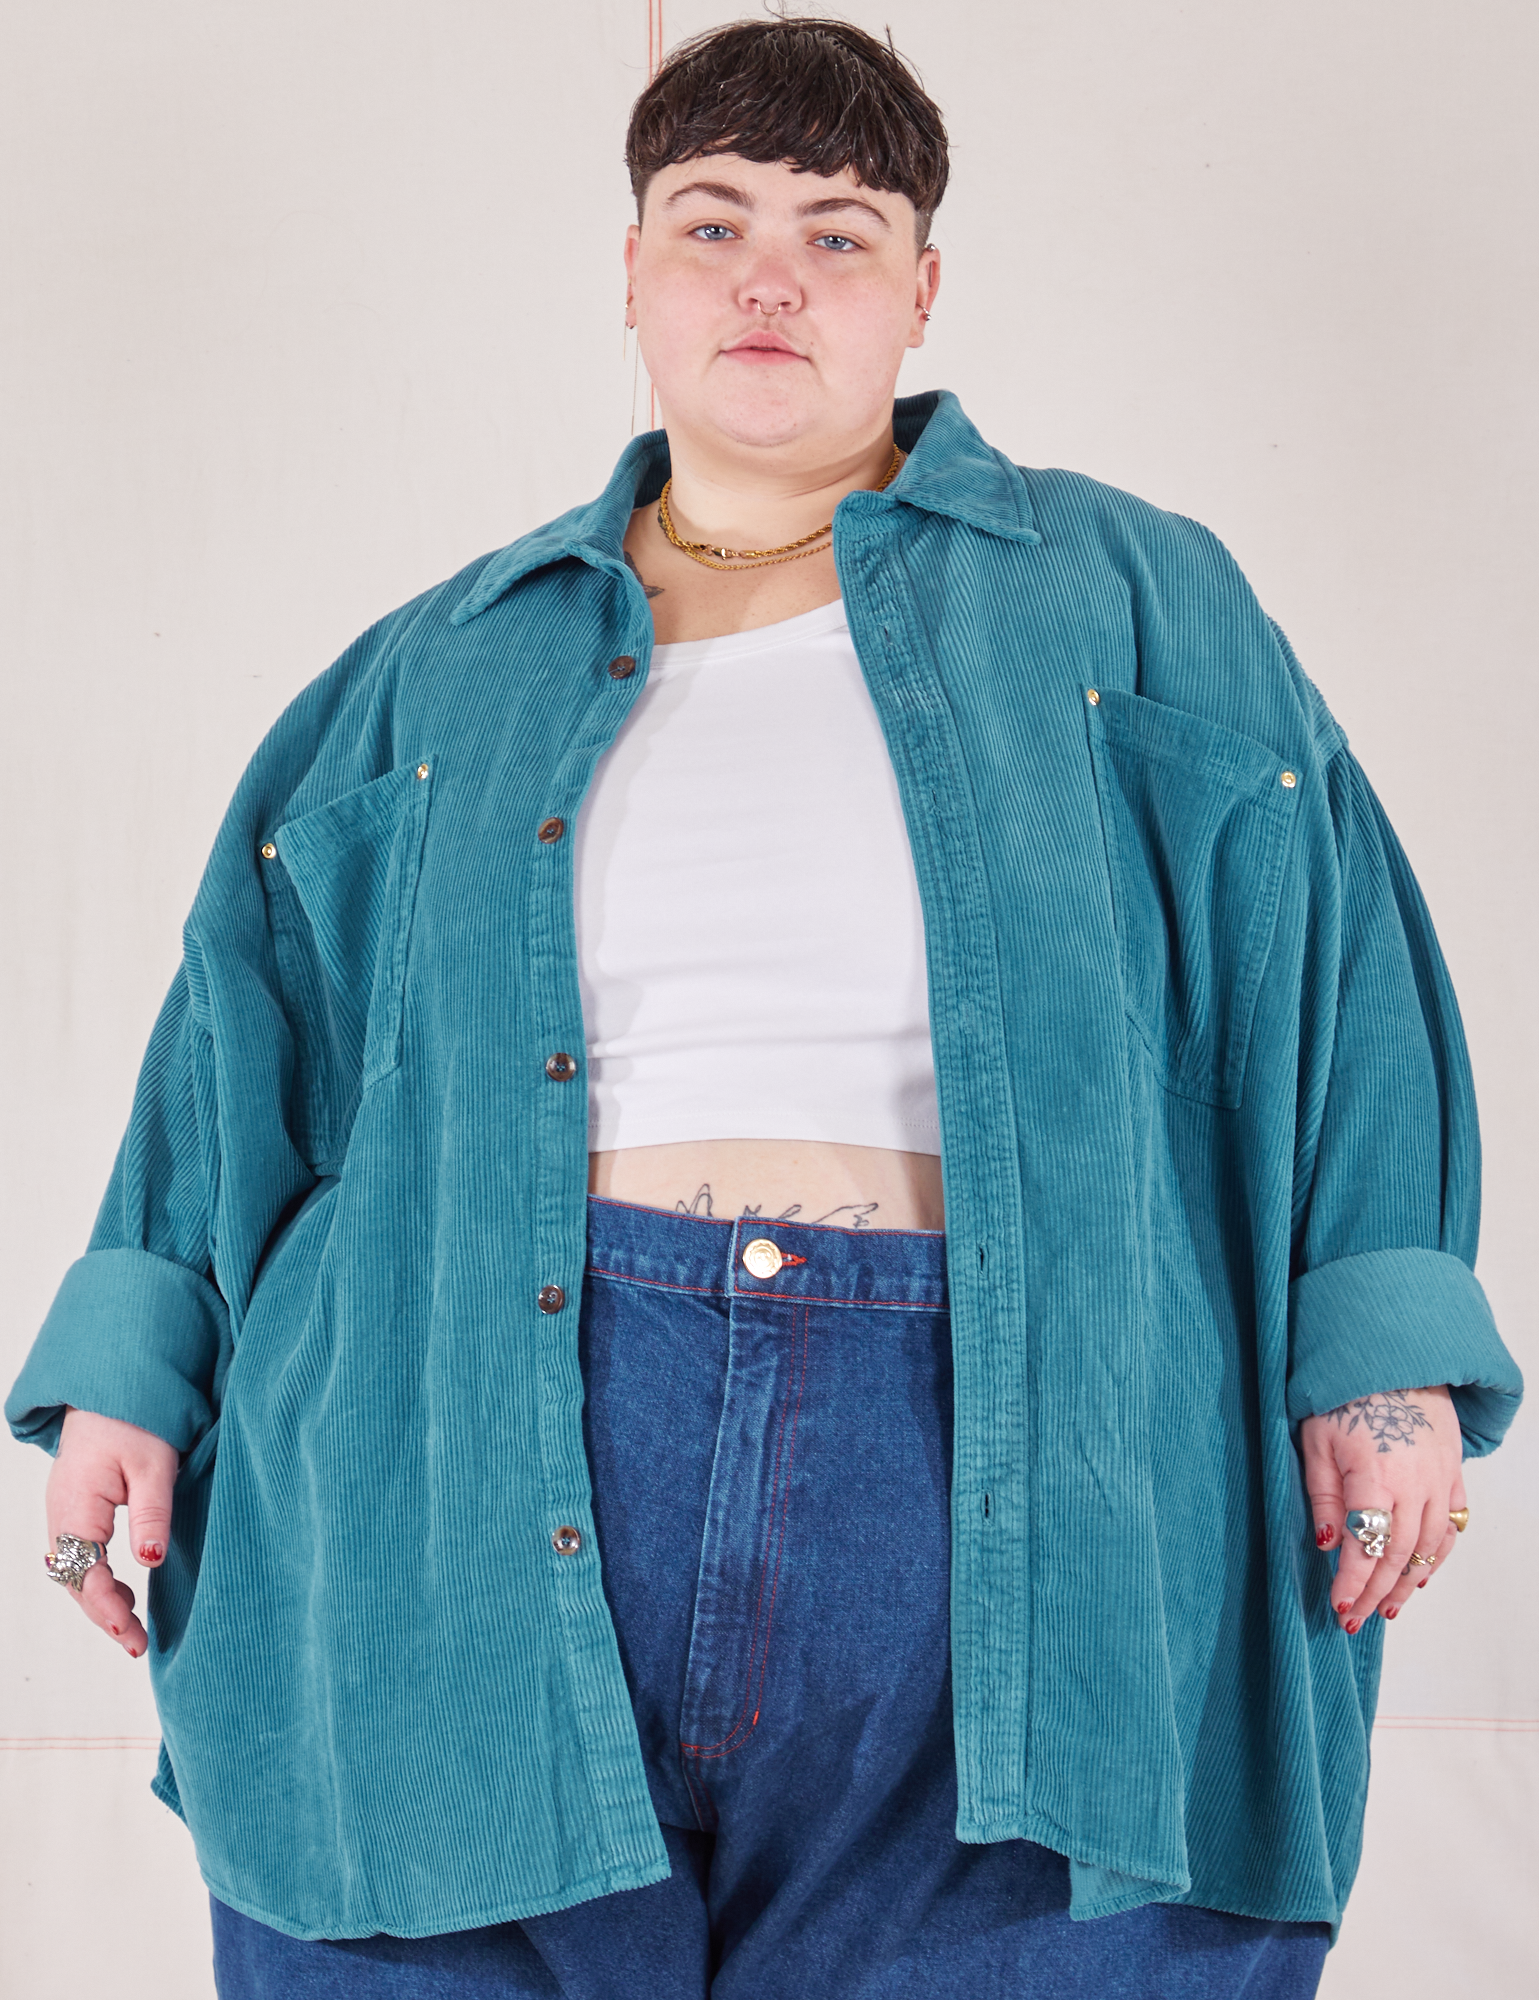 Jordan is 5&#39;4&quot; and wearing 4XL Corduroy Overshirt in Marine Blue